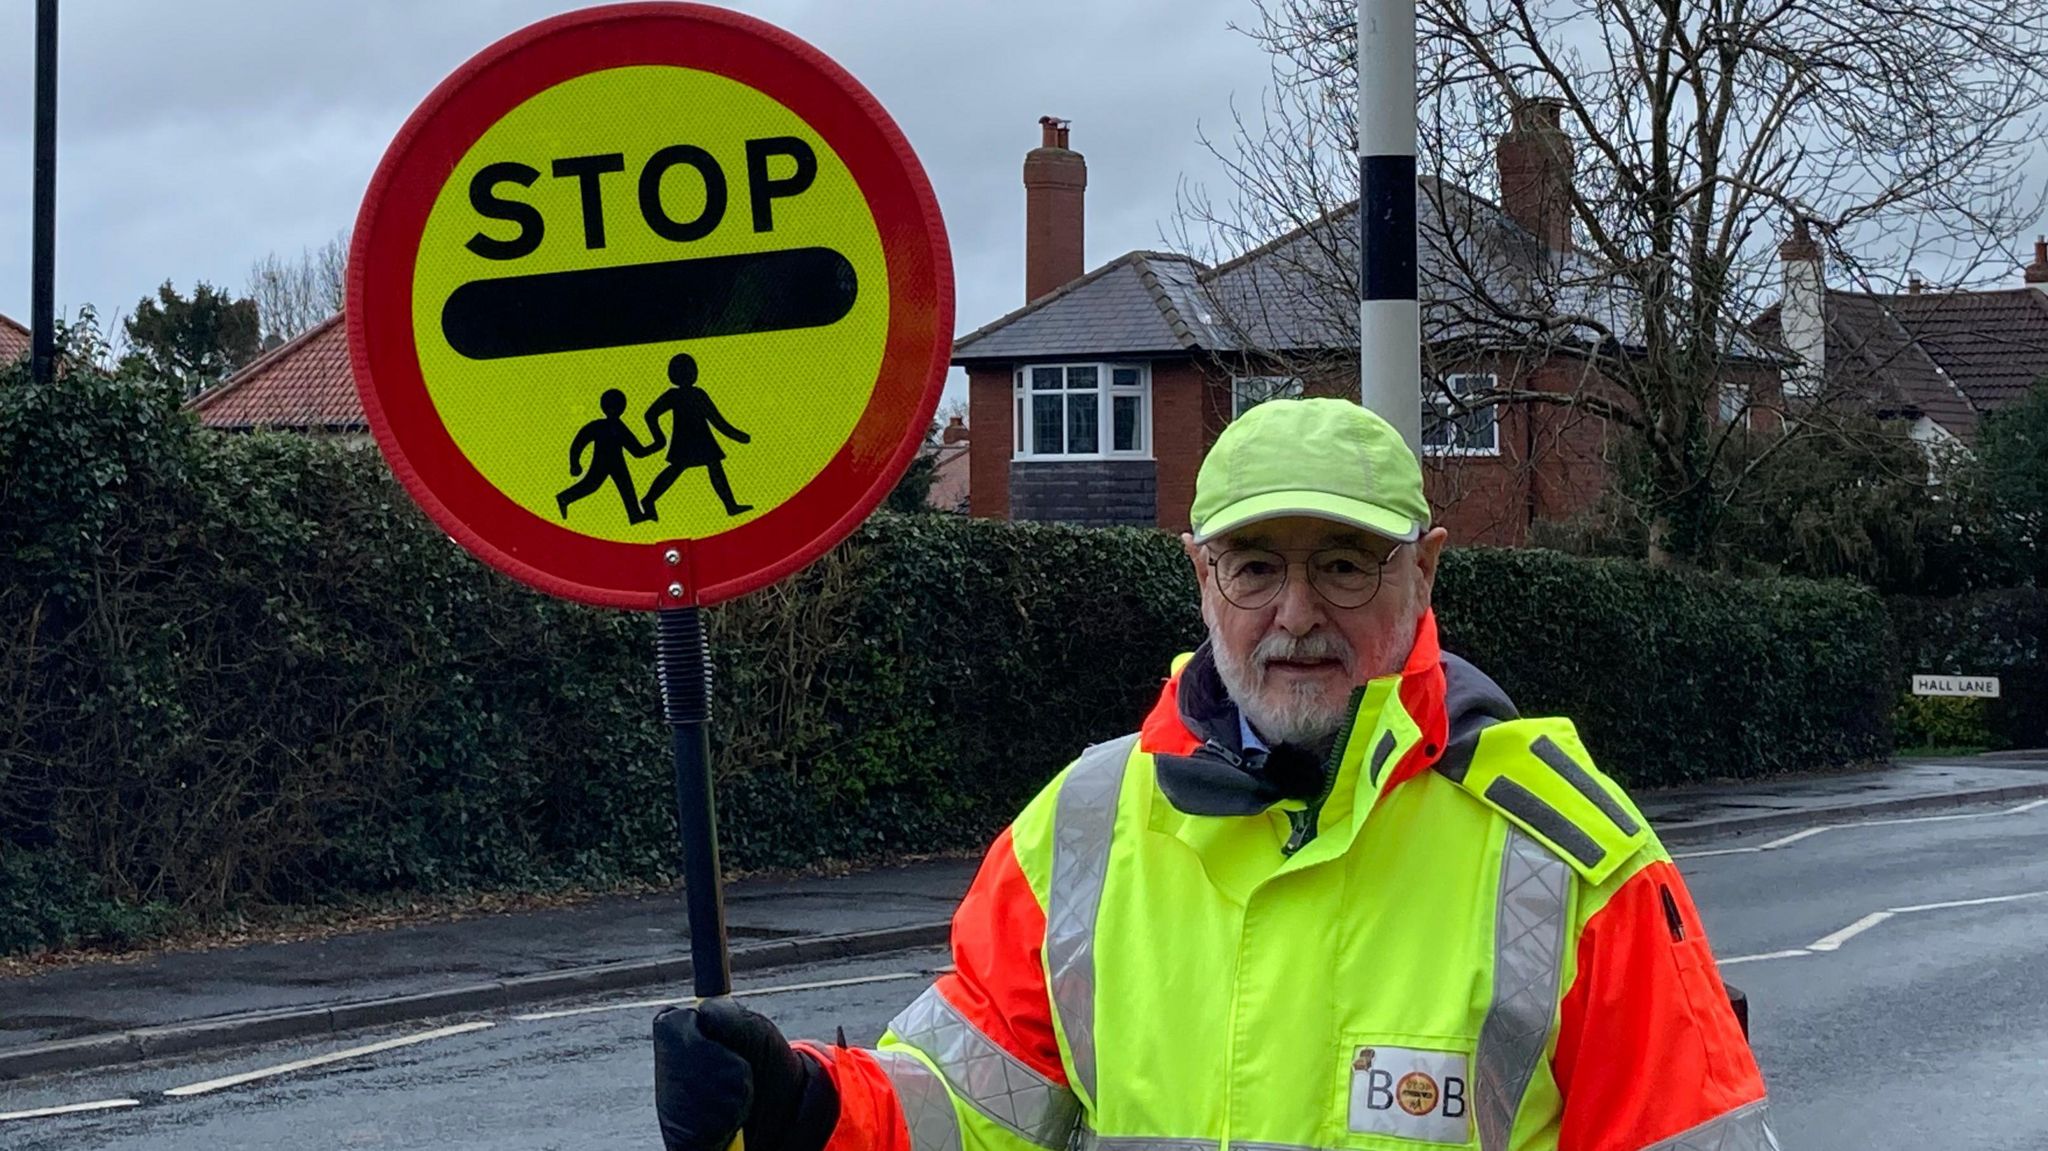 School crossing patrol officer Bob O'Neill stood with his lollipop at the side of the road